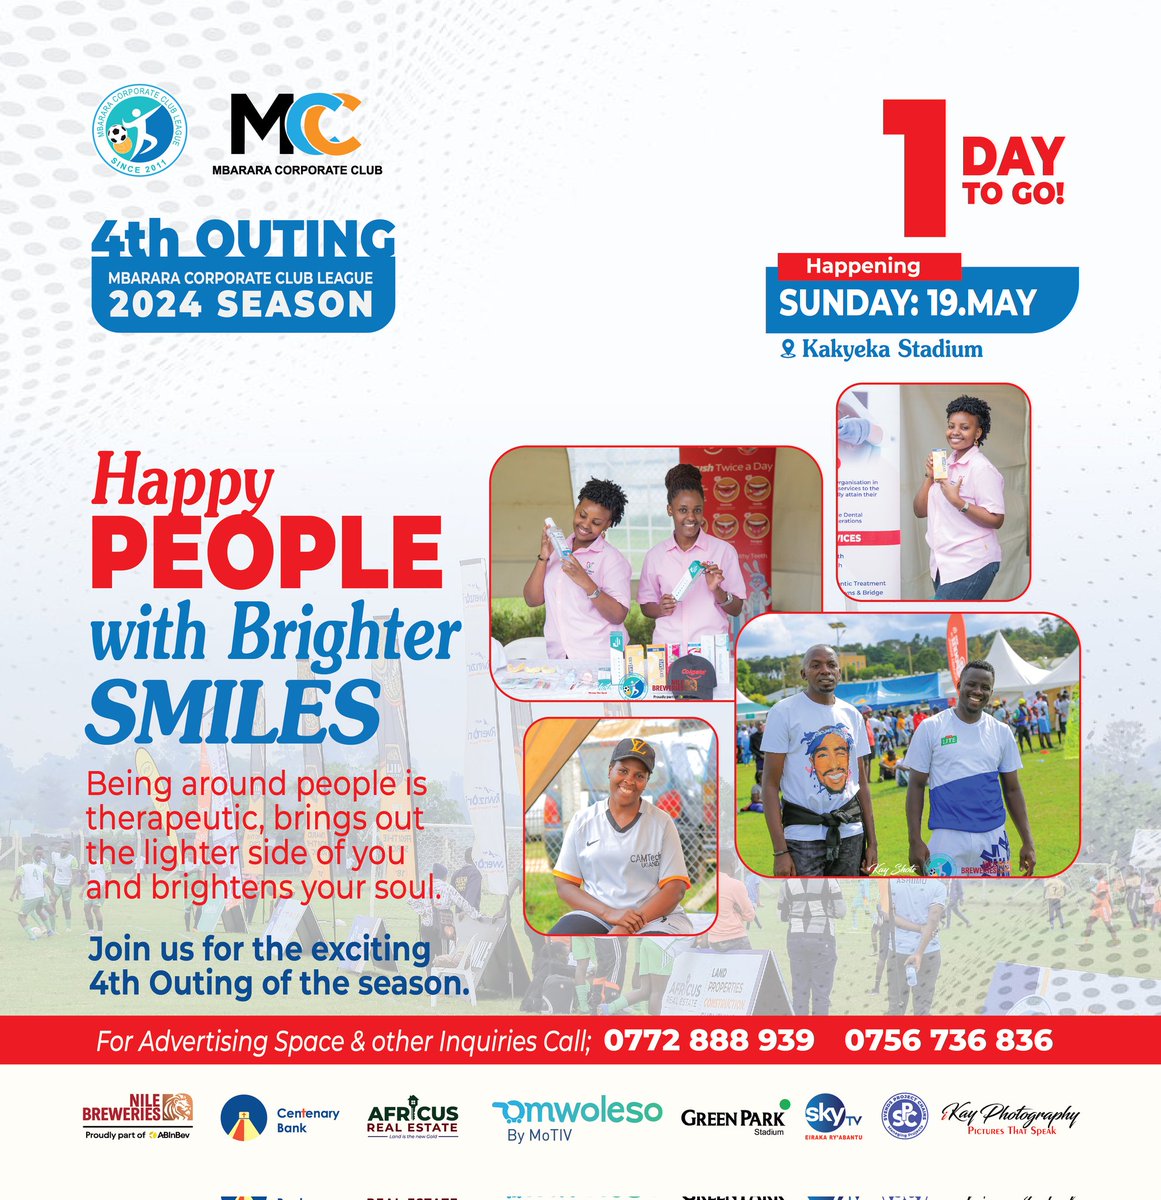 #4THOUTING_COUNTDOWN 
Let's be at Kakyeka Stadium this Beautiful Sunday and Share those Brighter Smiles from Happy People.
It's always therapeutic to be aroujd happy people. 
#NBLMCCSeason24 
#MCC4THOUTING